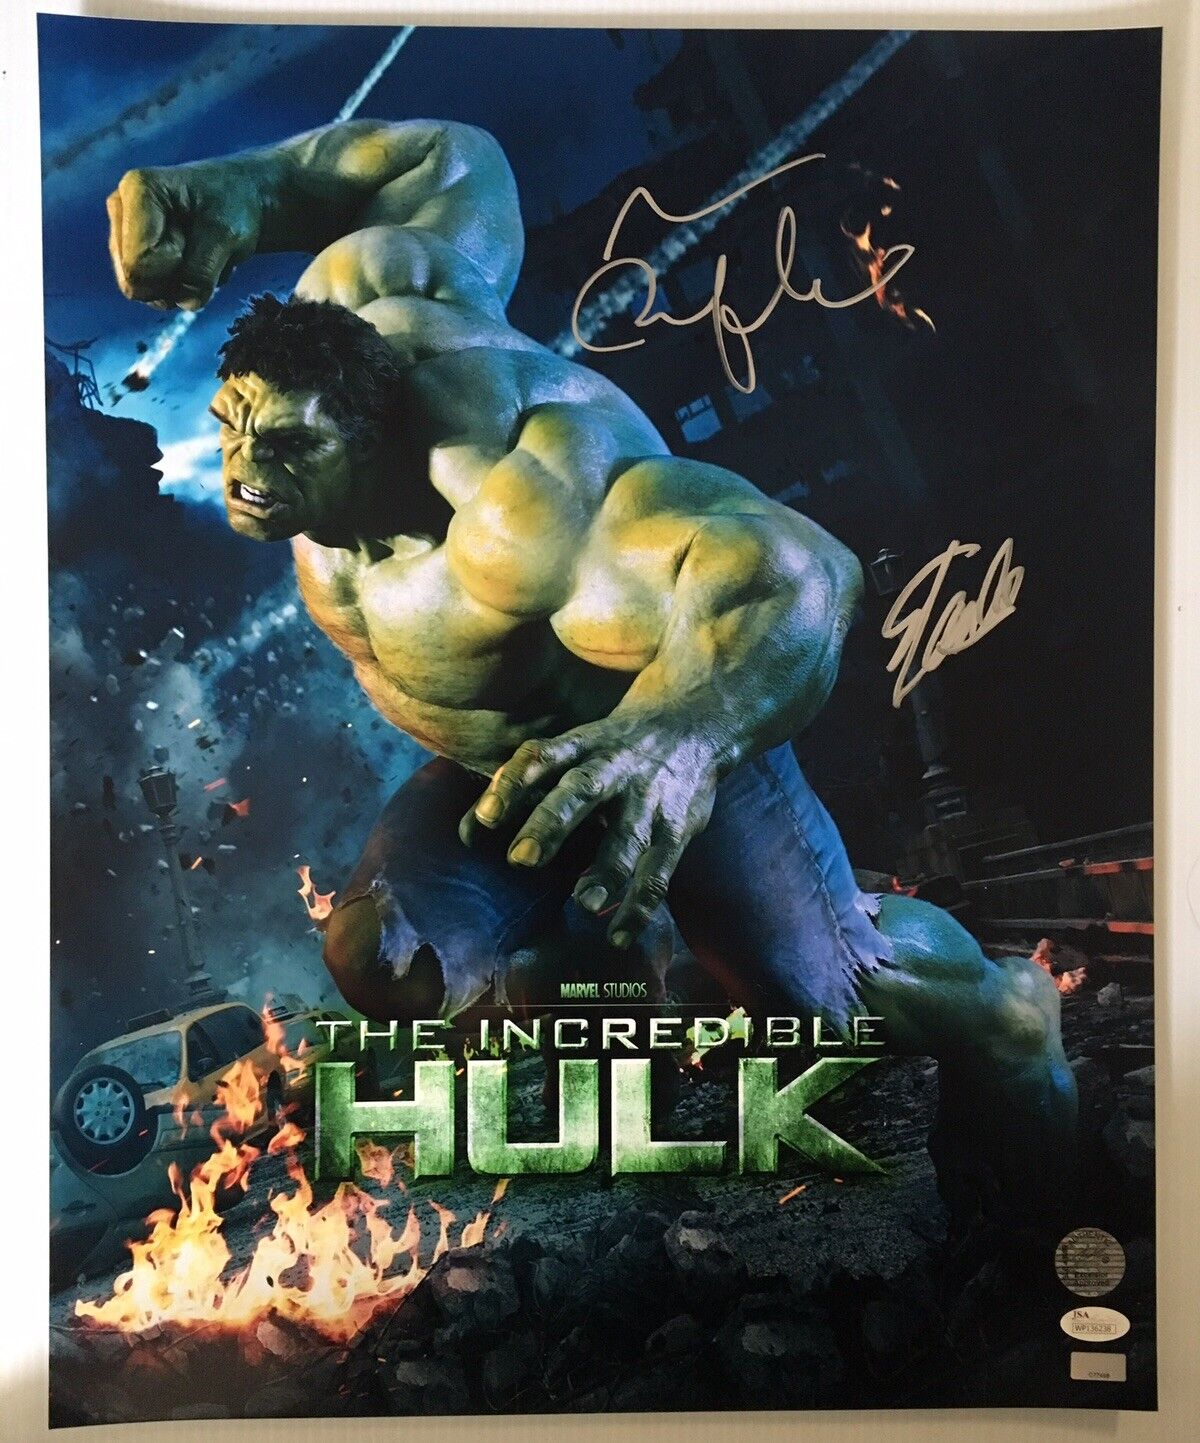 Stan Lee Mark Ruffalo Signed Autographed 16x20 Photo Poster painting JSA CELEBRITY AUTHENTICS